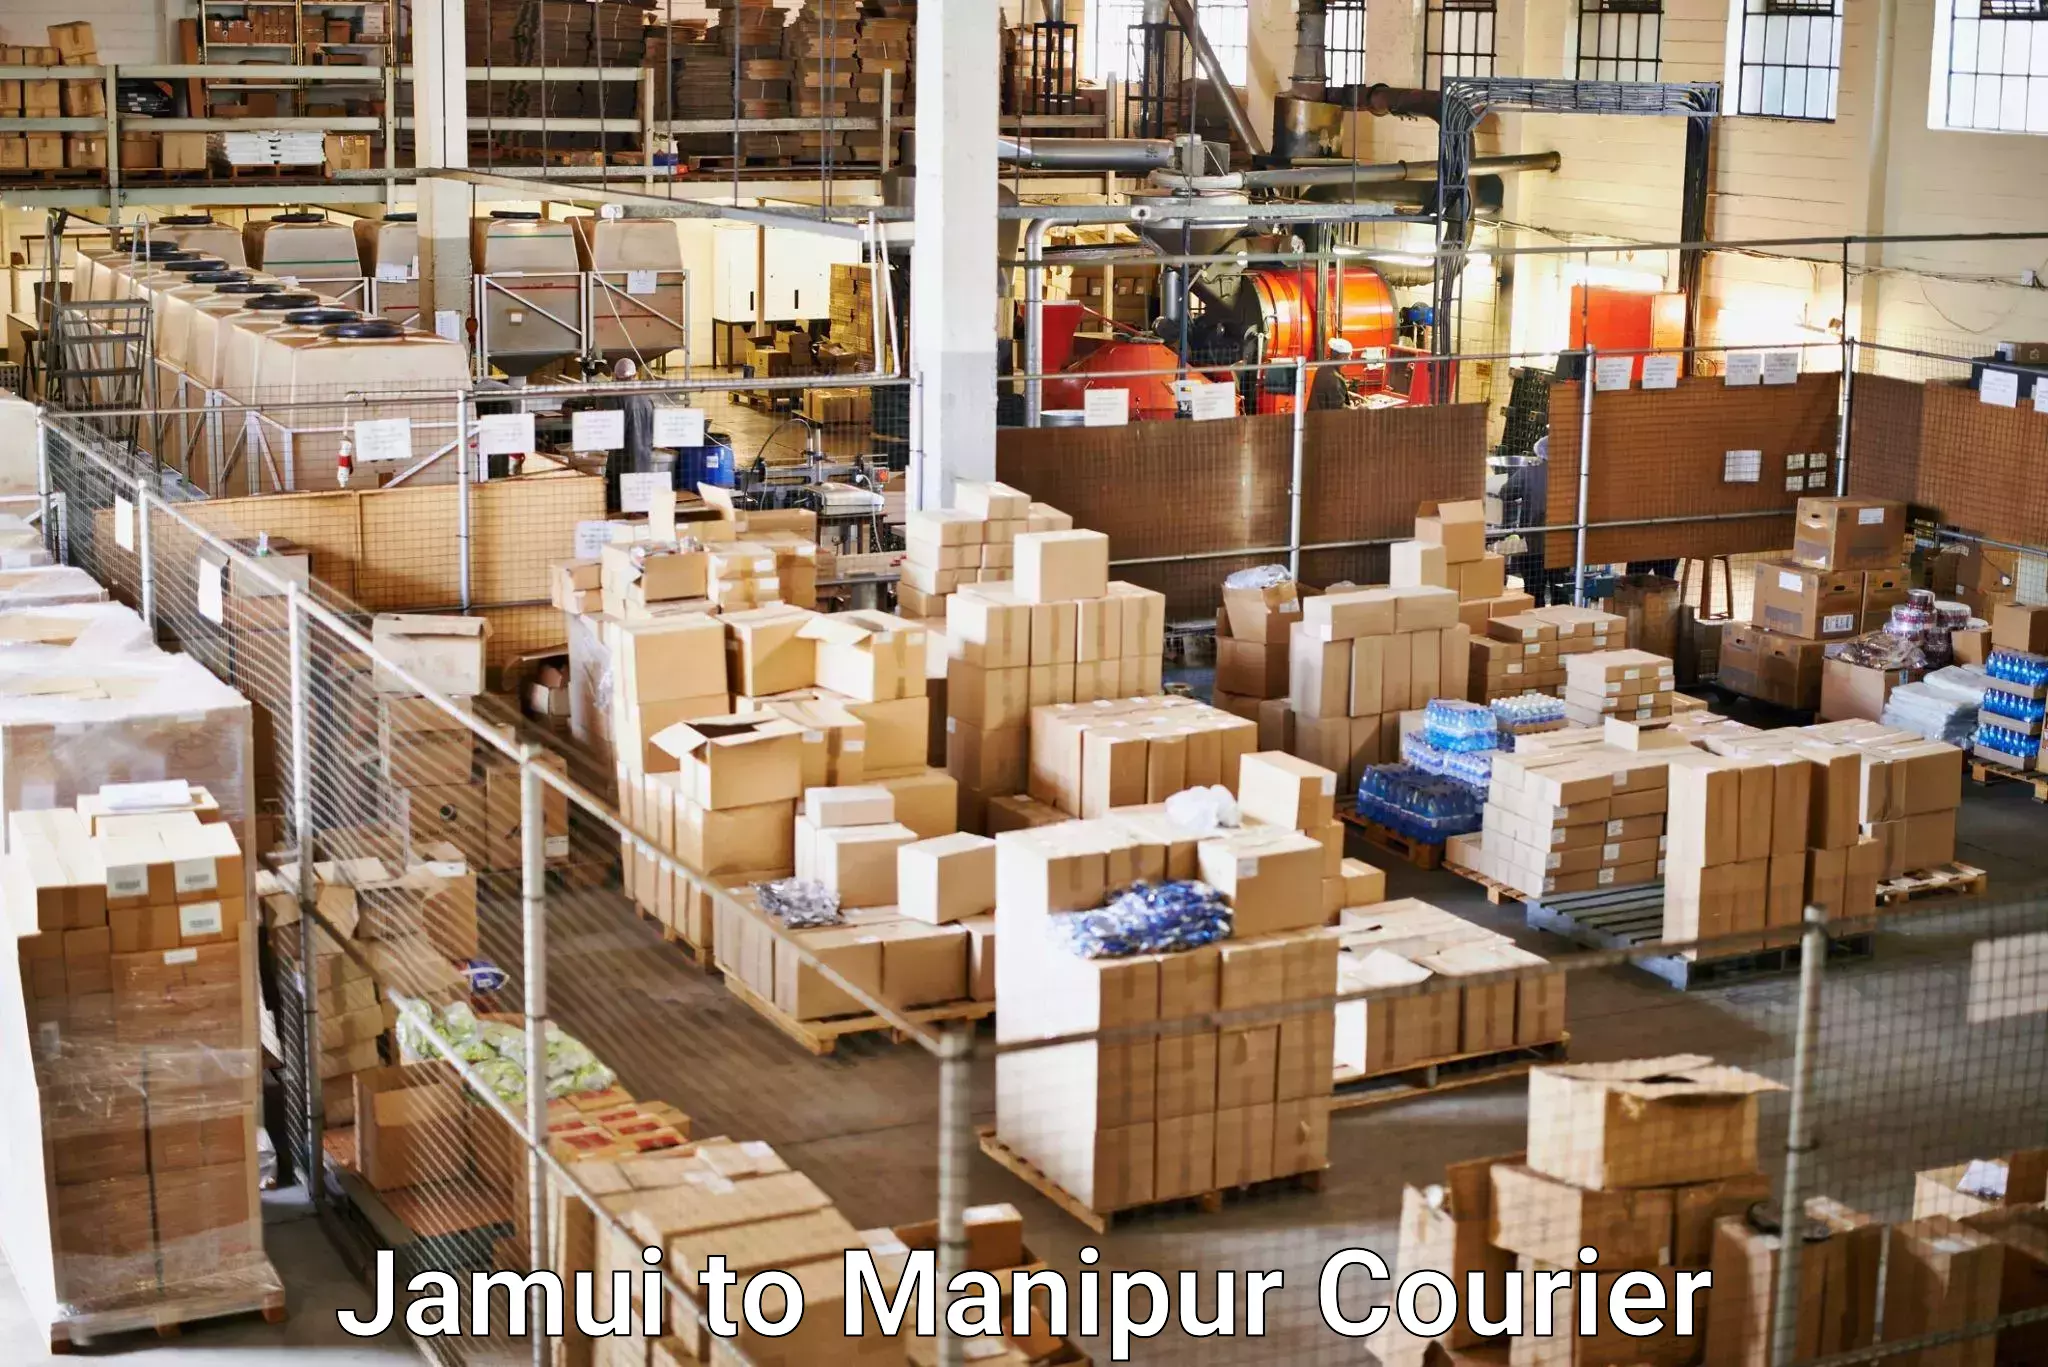 On-demand delivery in Jamui to Chandel